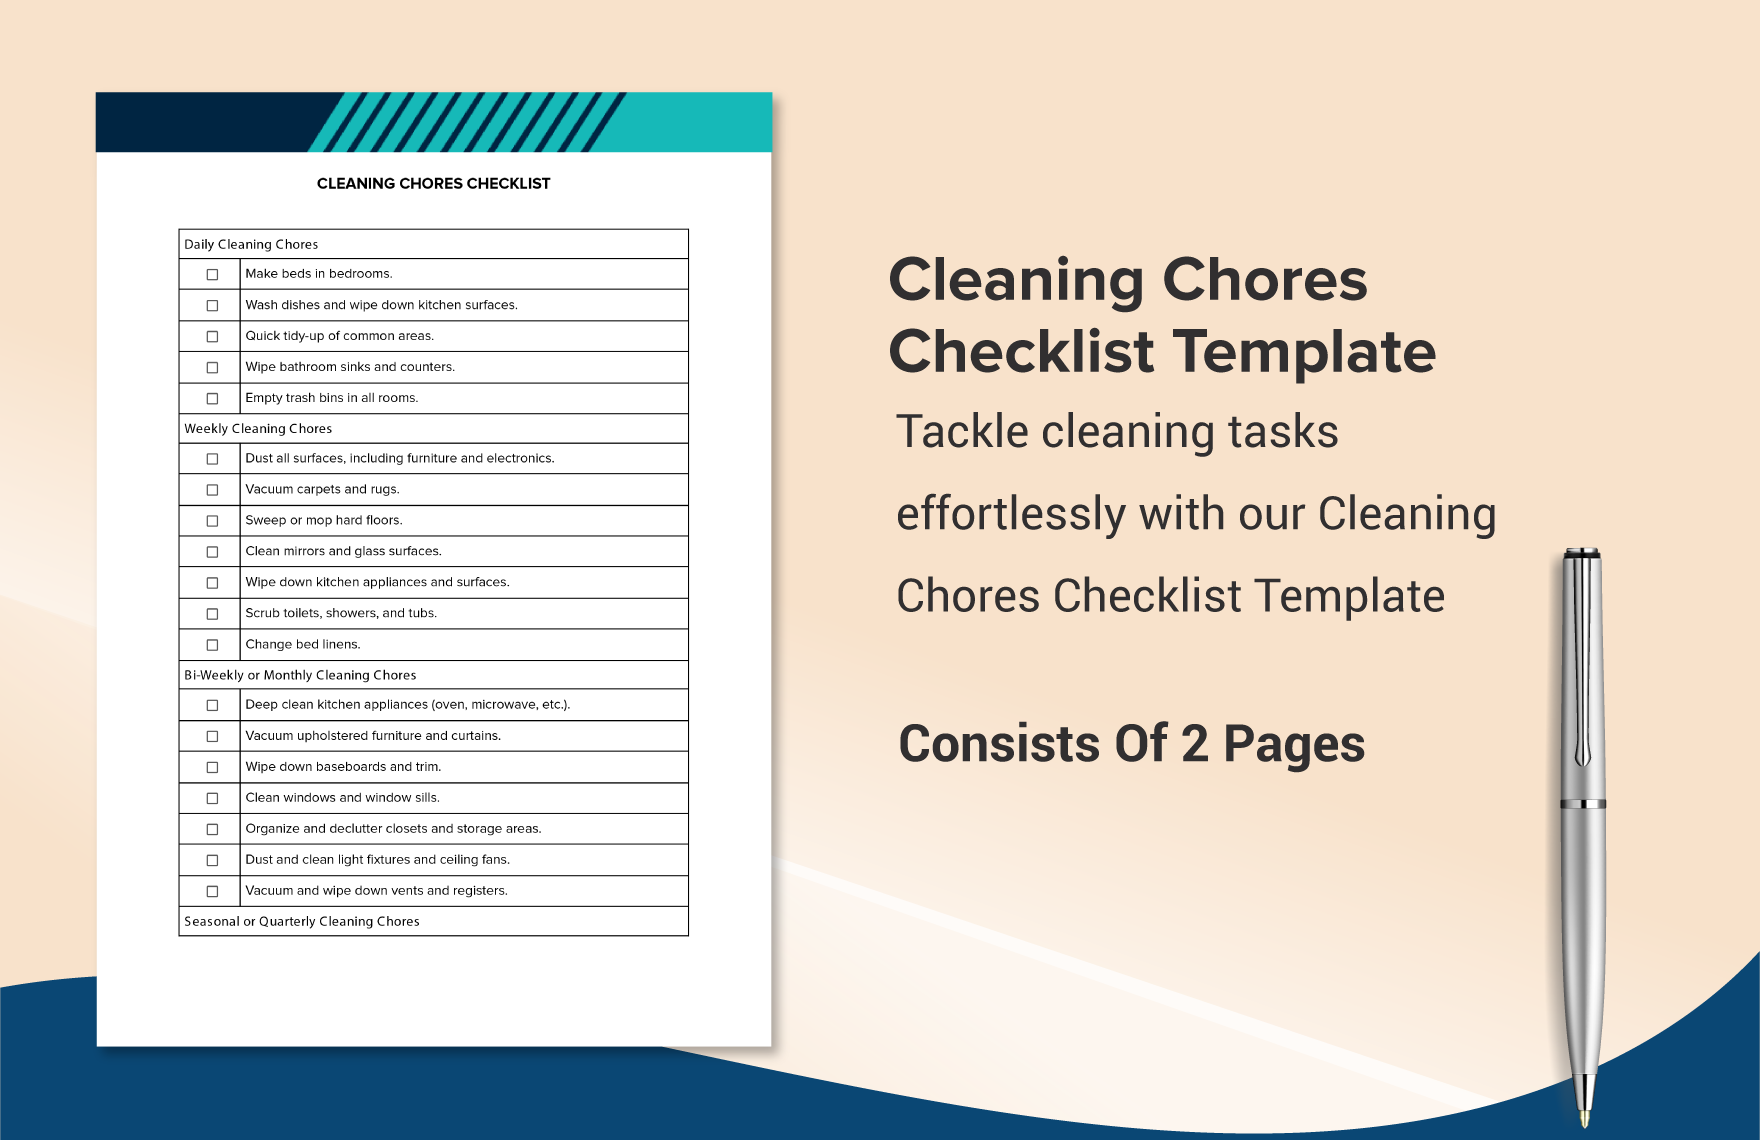 Cleaning Chores Checklist Template